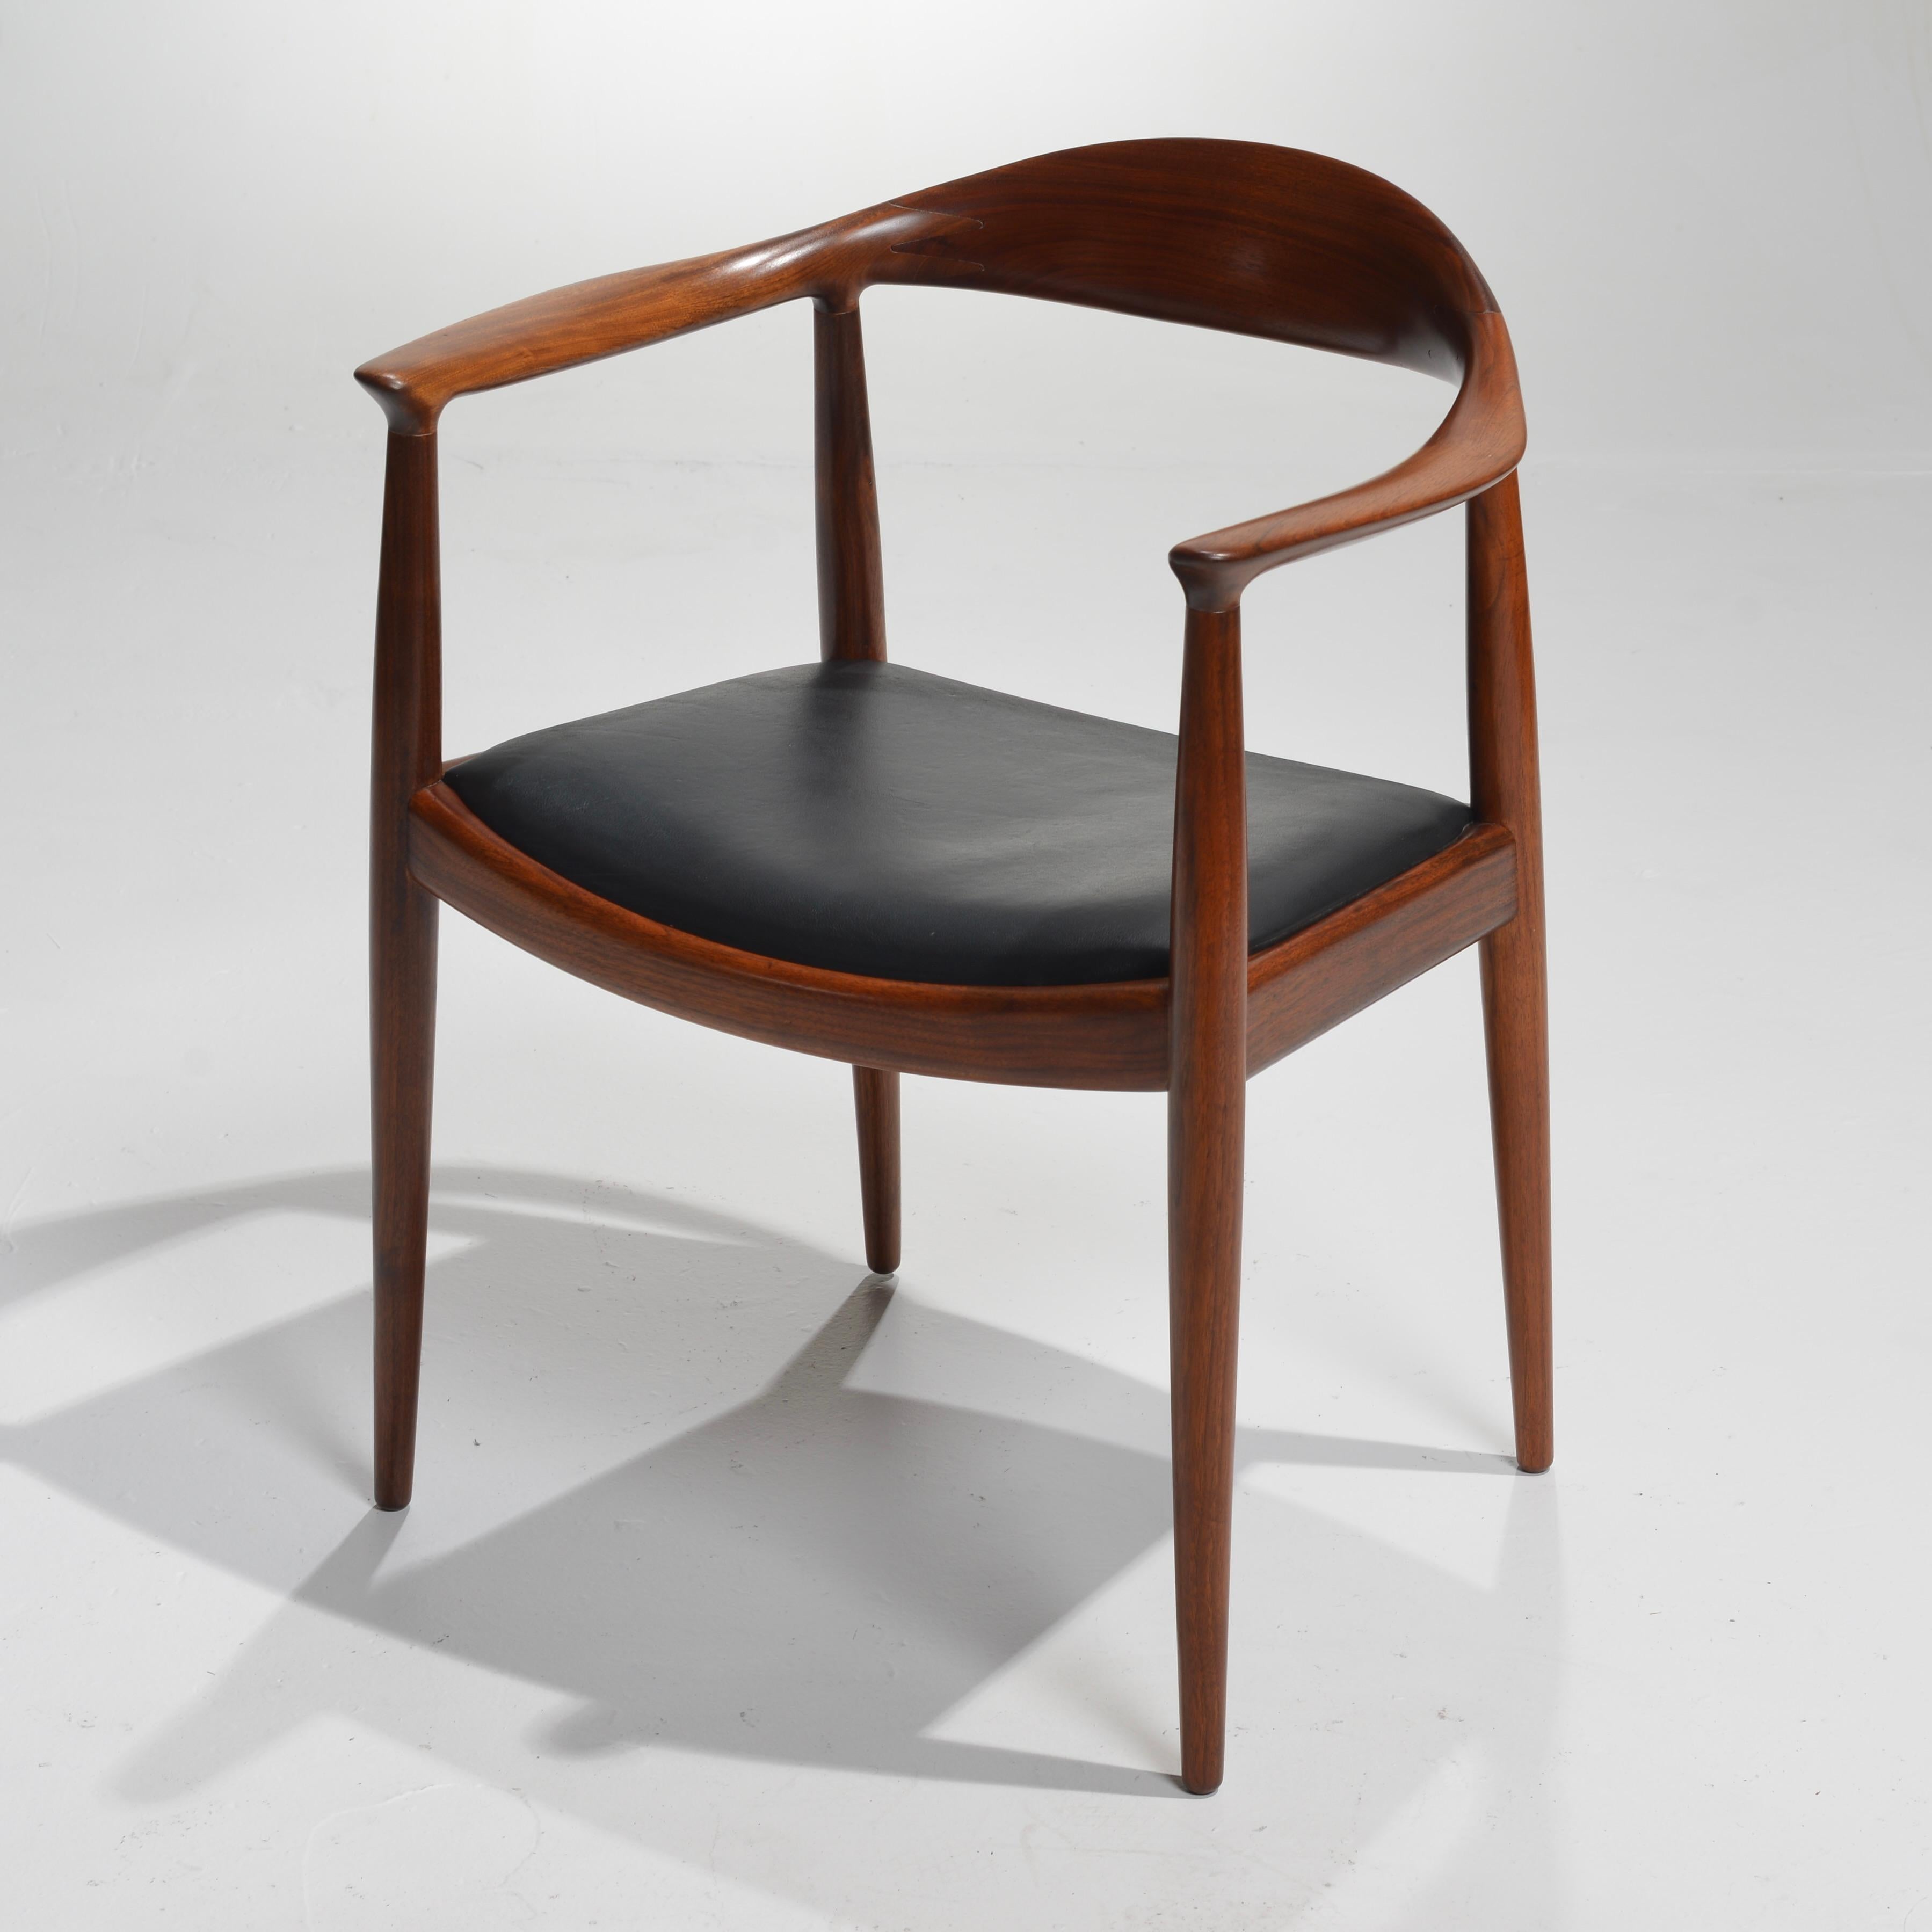  8 Hans Wegner for Johannes Hansen JH-503 Chairs in Walnut and Leather For Sale 2